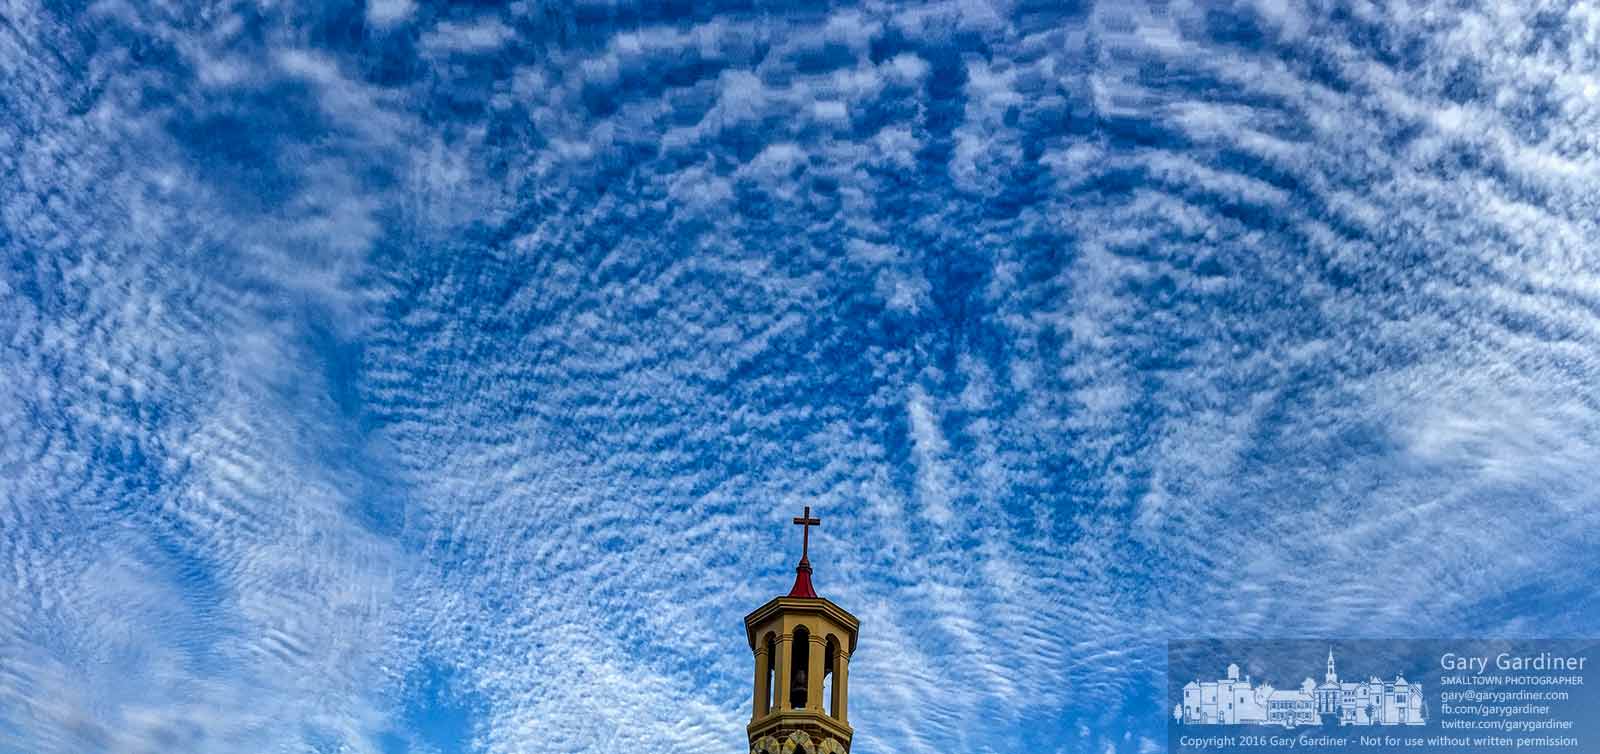 The old church steeple for St. Paul the Apostle Catholic Church sits under a cloudy blue sky on a Sunday morning. My Final Photo for May 22, 2016.